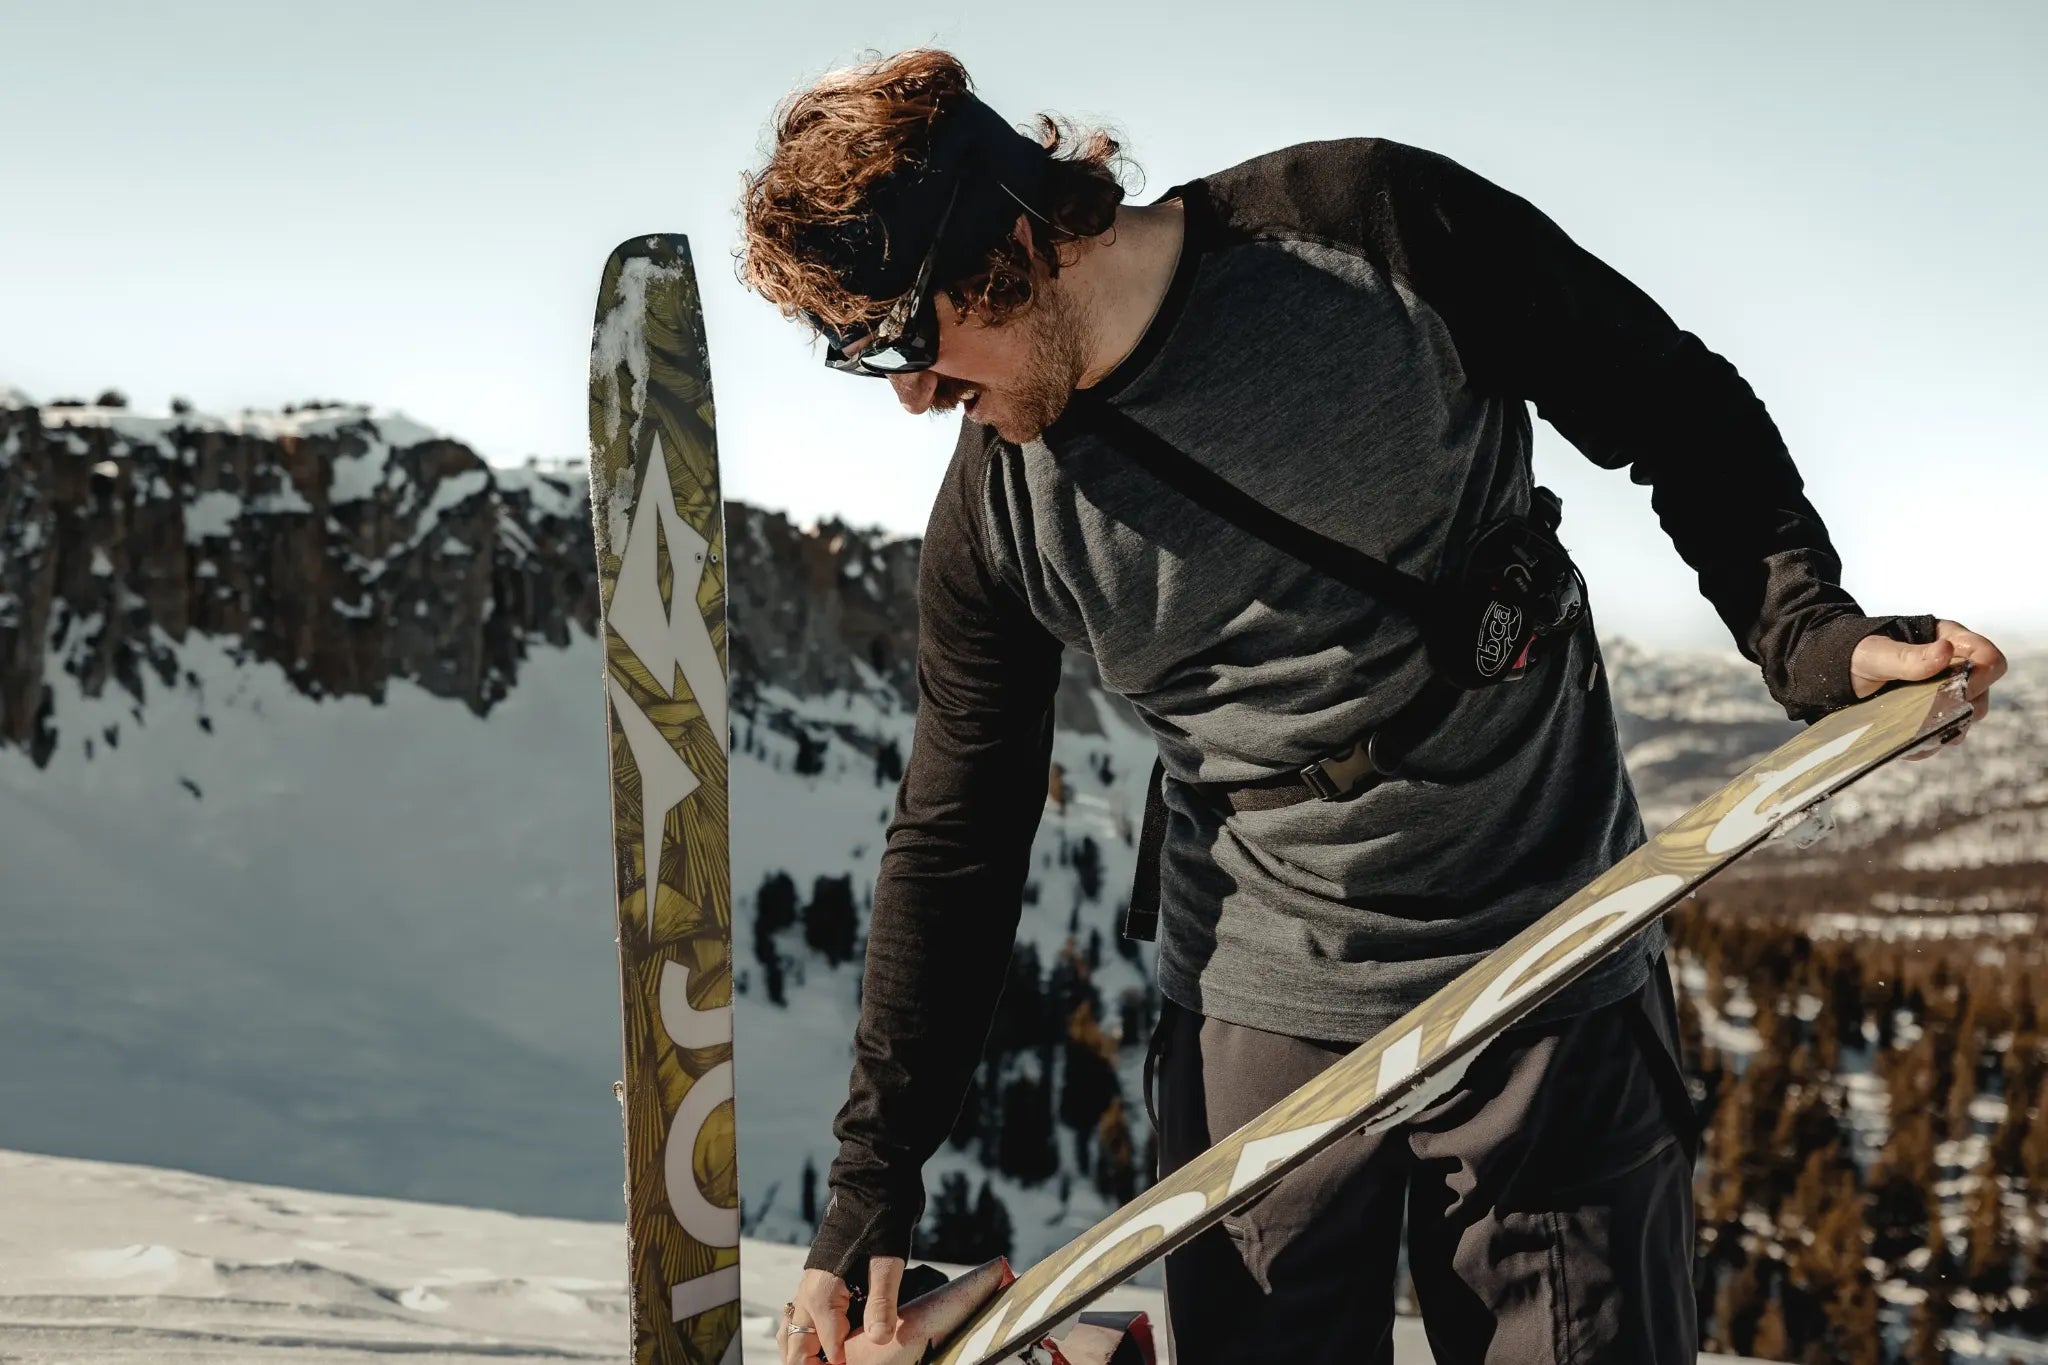 a splitboarder puts skins on his splitboard to prepare for the descent in the Mammoth Lakes backcountry